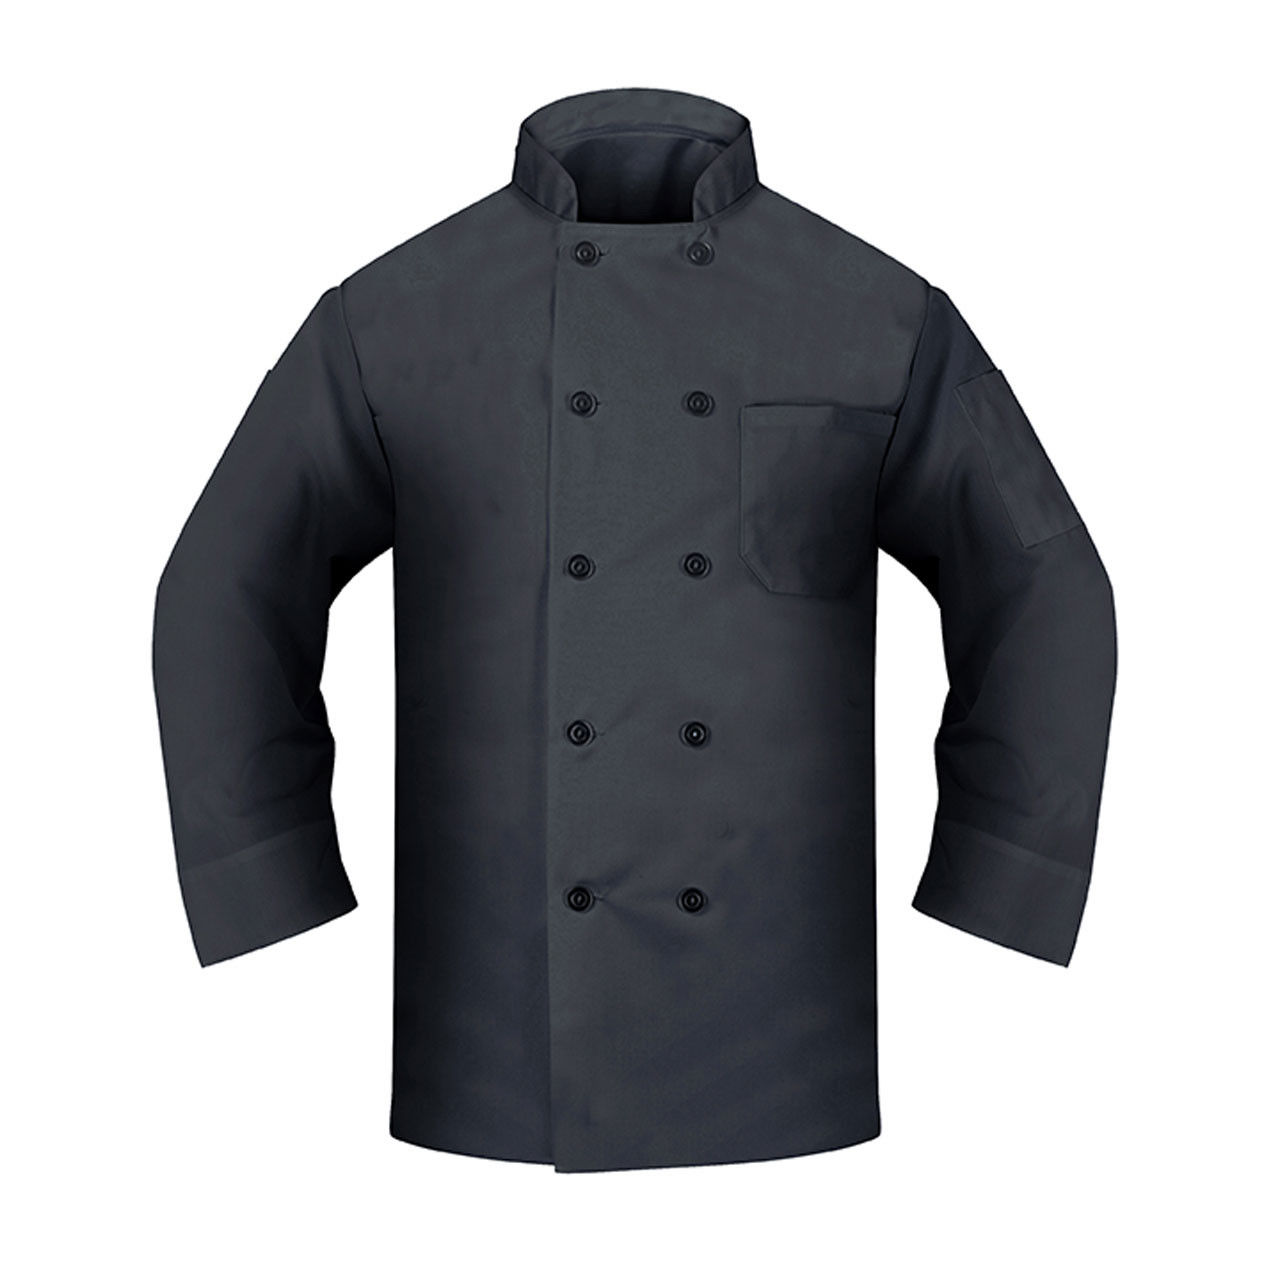 Do the black chef coats have specific types of pockets?